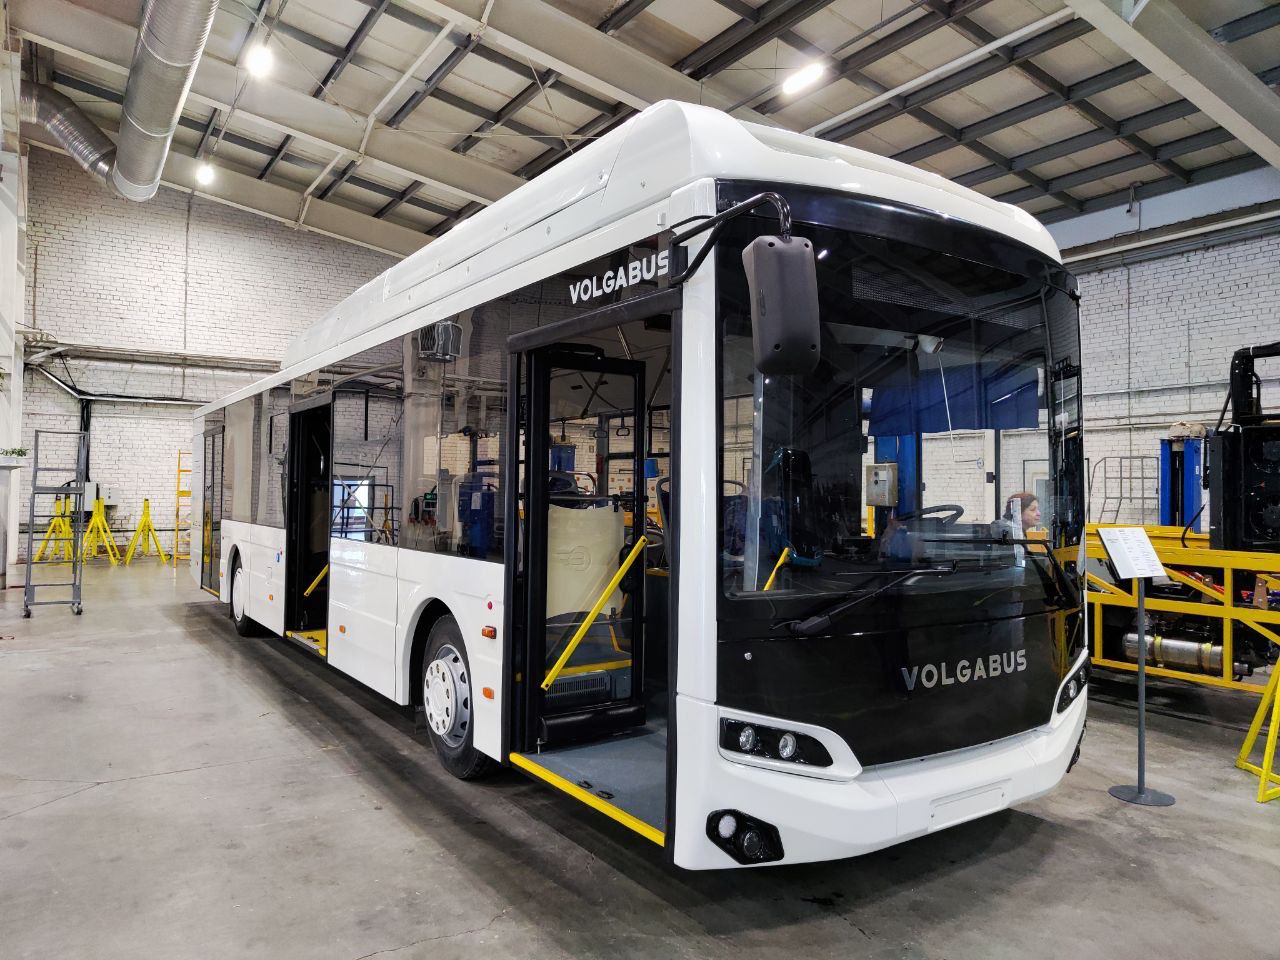 The updated bus Volgabus-5270G2 is presented – with a new appearance and sides that are completely non-corrosive